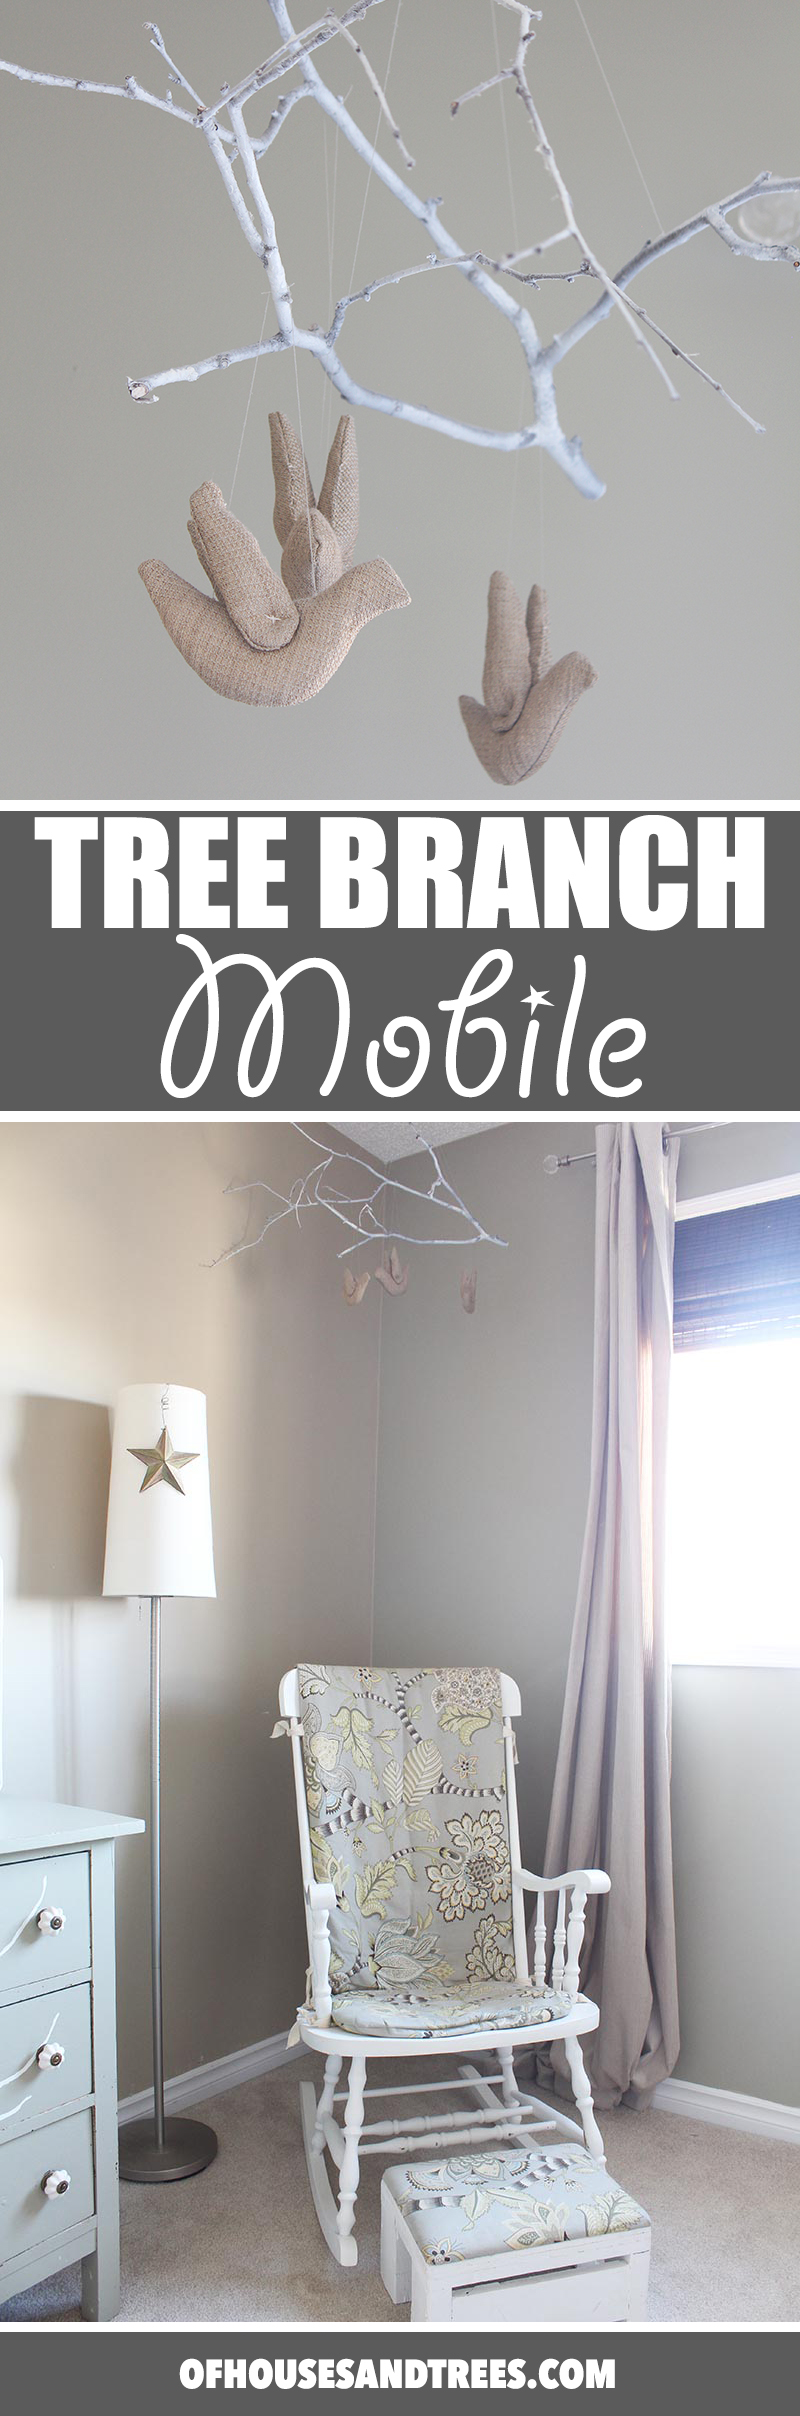 Super charming and whimsical DIY tree branch mobile made with a spray-painted poplar branch, stuffed birds and fishing line.